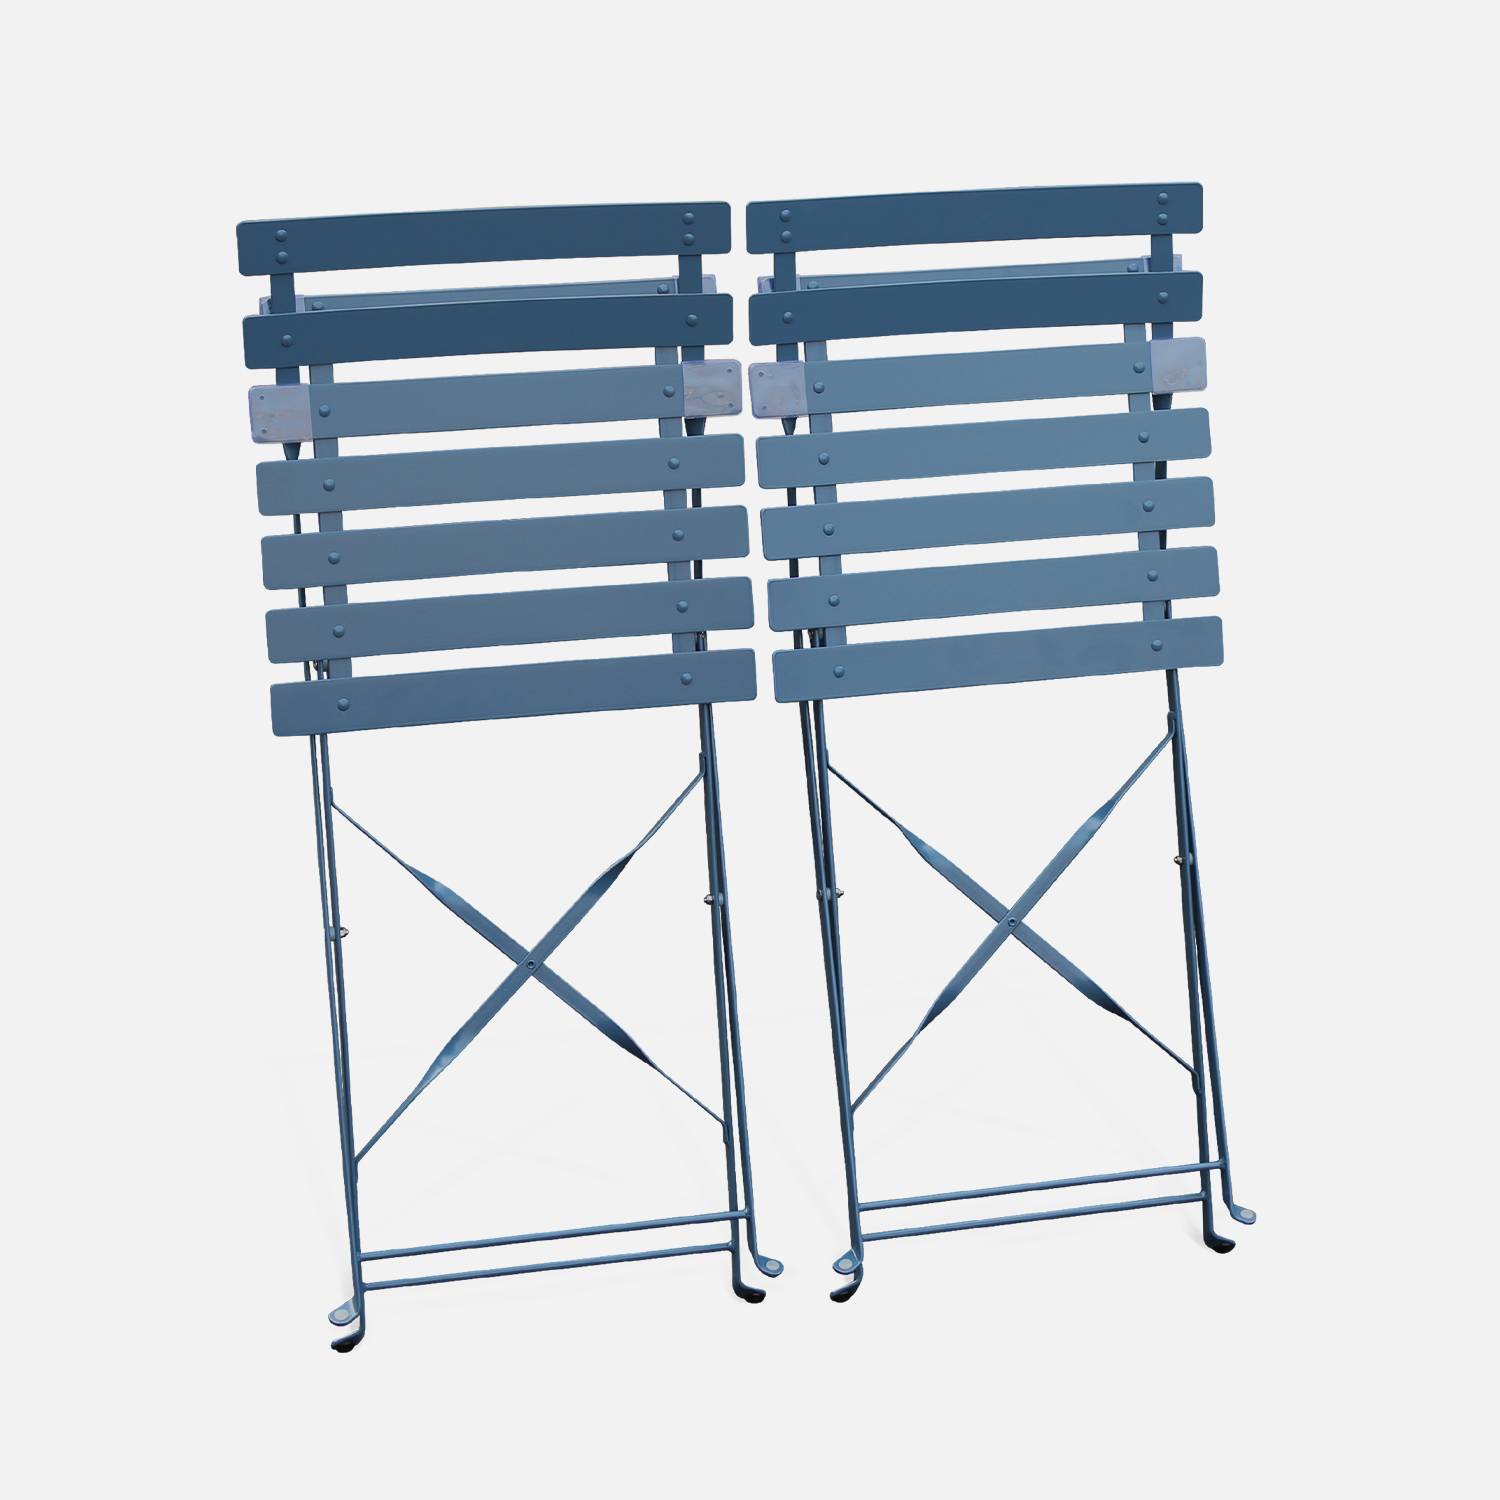 Set of 2 foldable bistro chairs - Emilia blue-grey - Thermo-lacquered steel Photo5